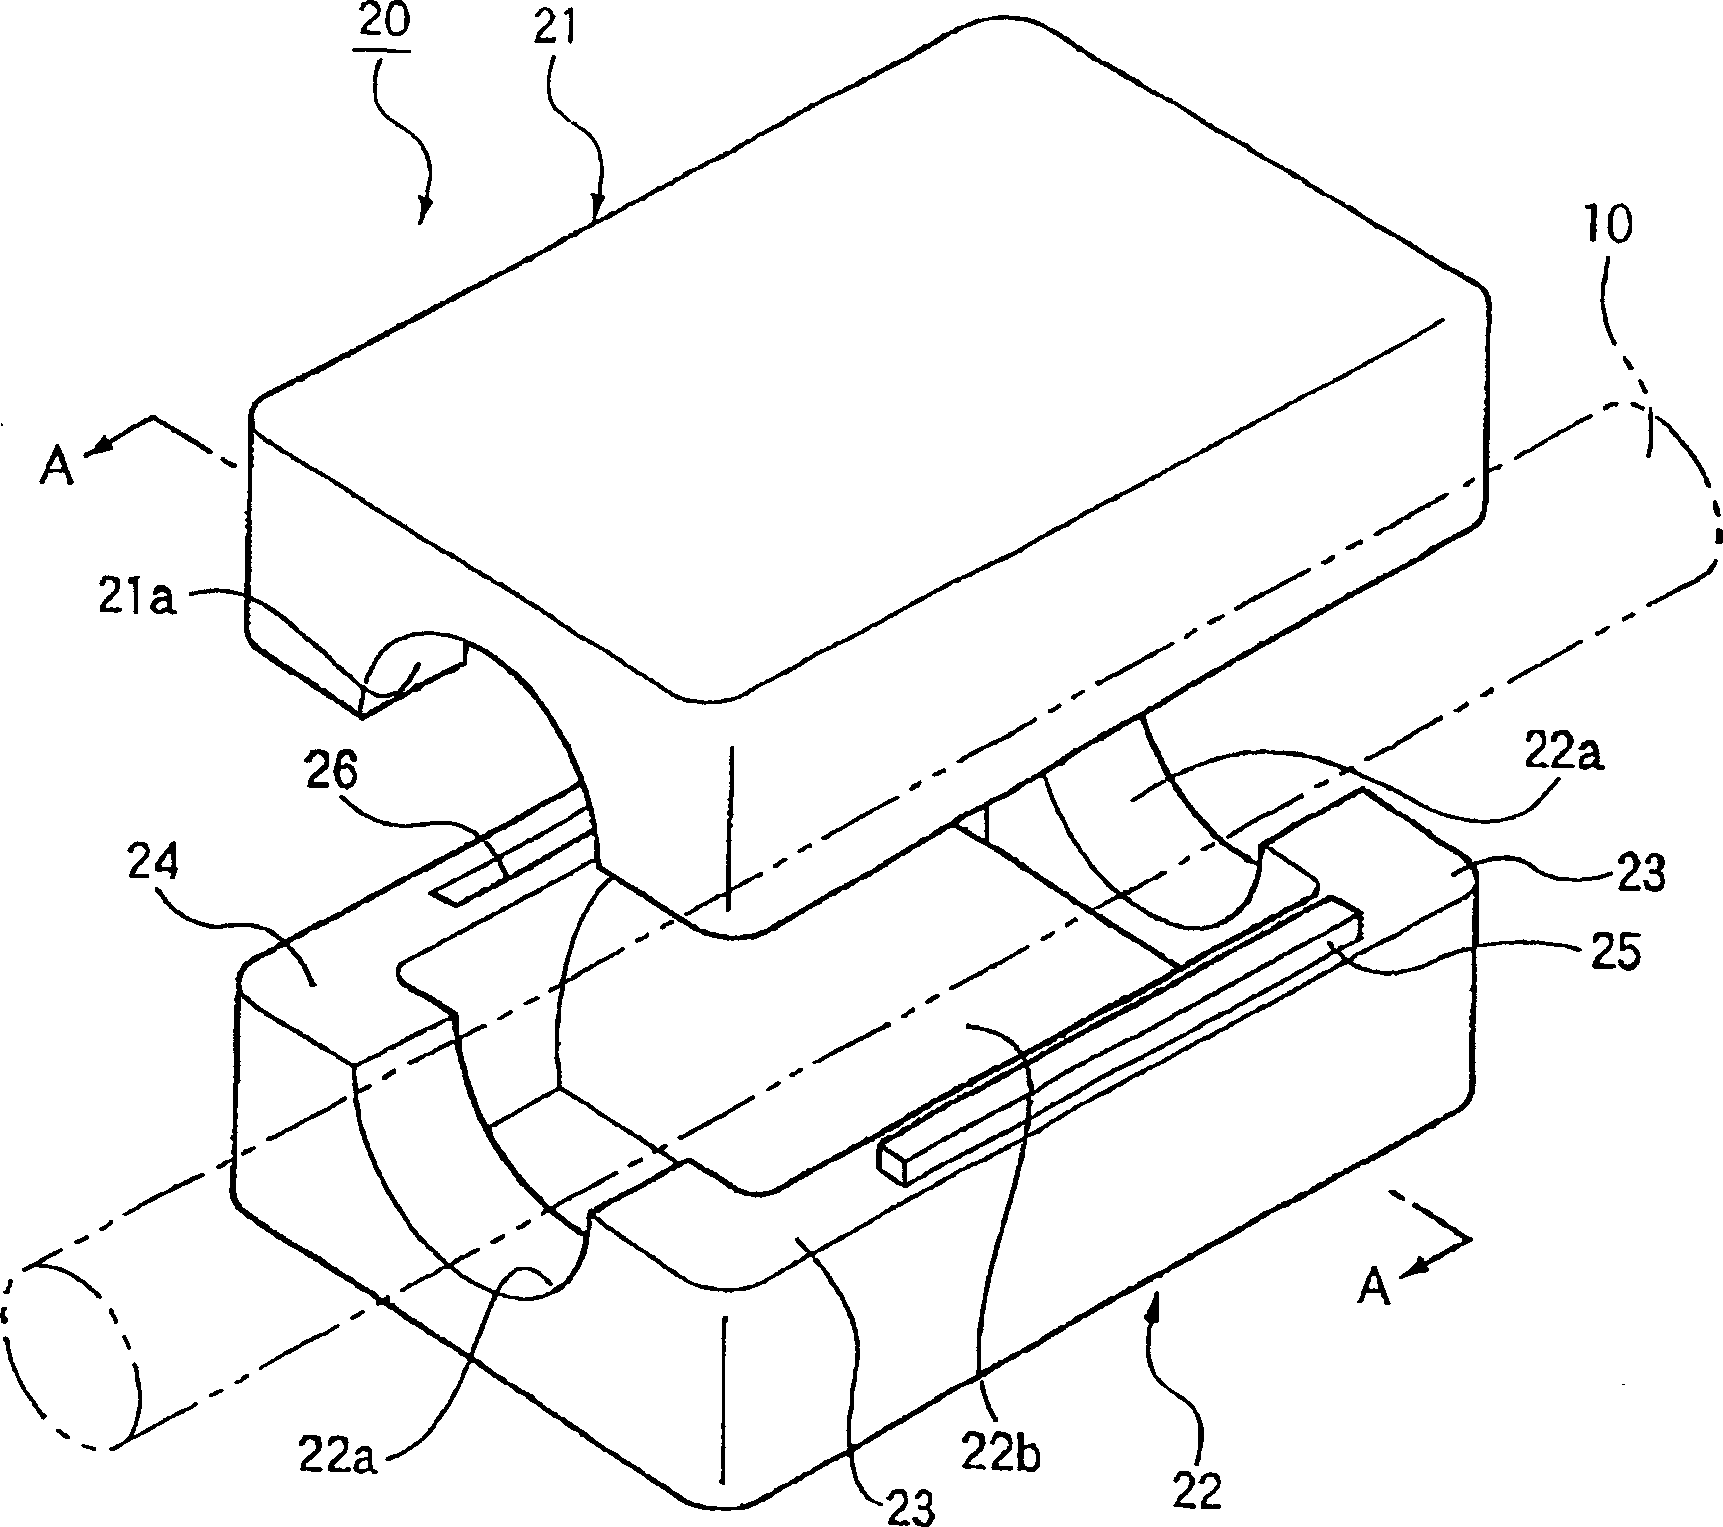 Water cutoff structure of covered wire